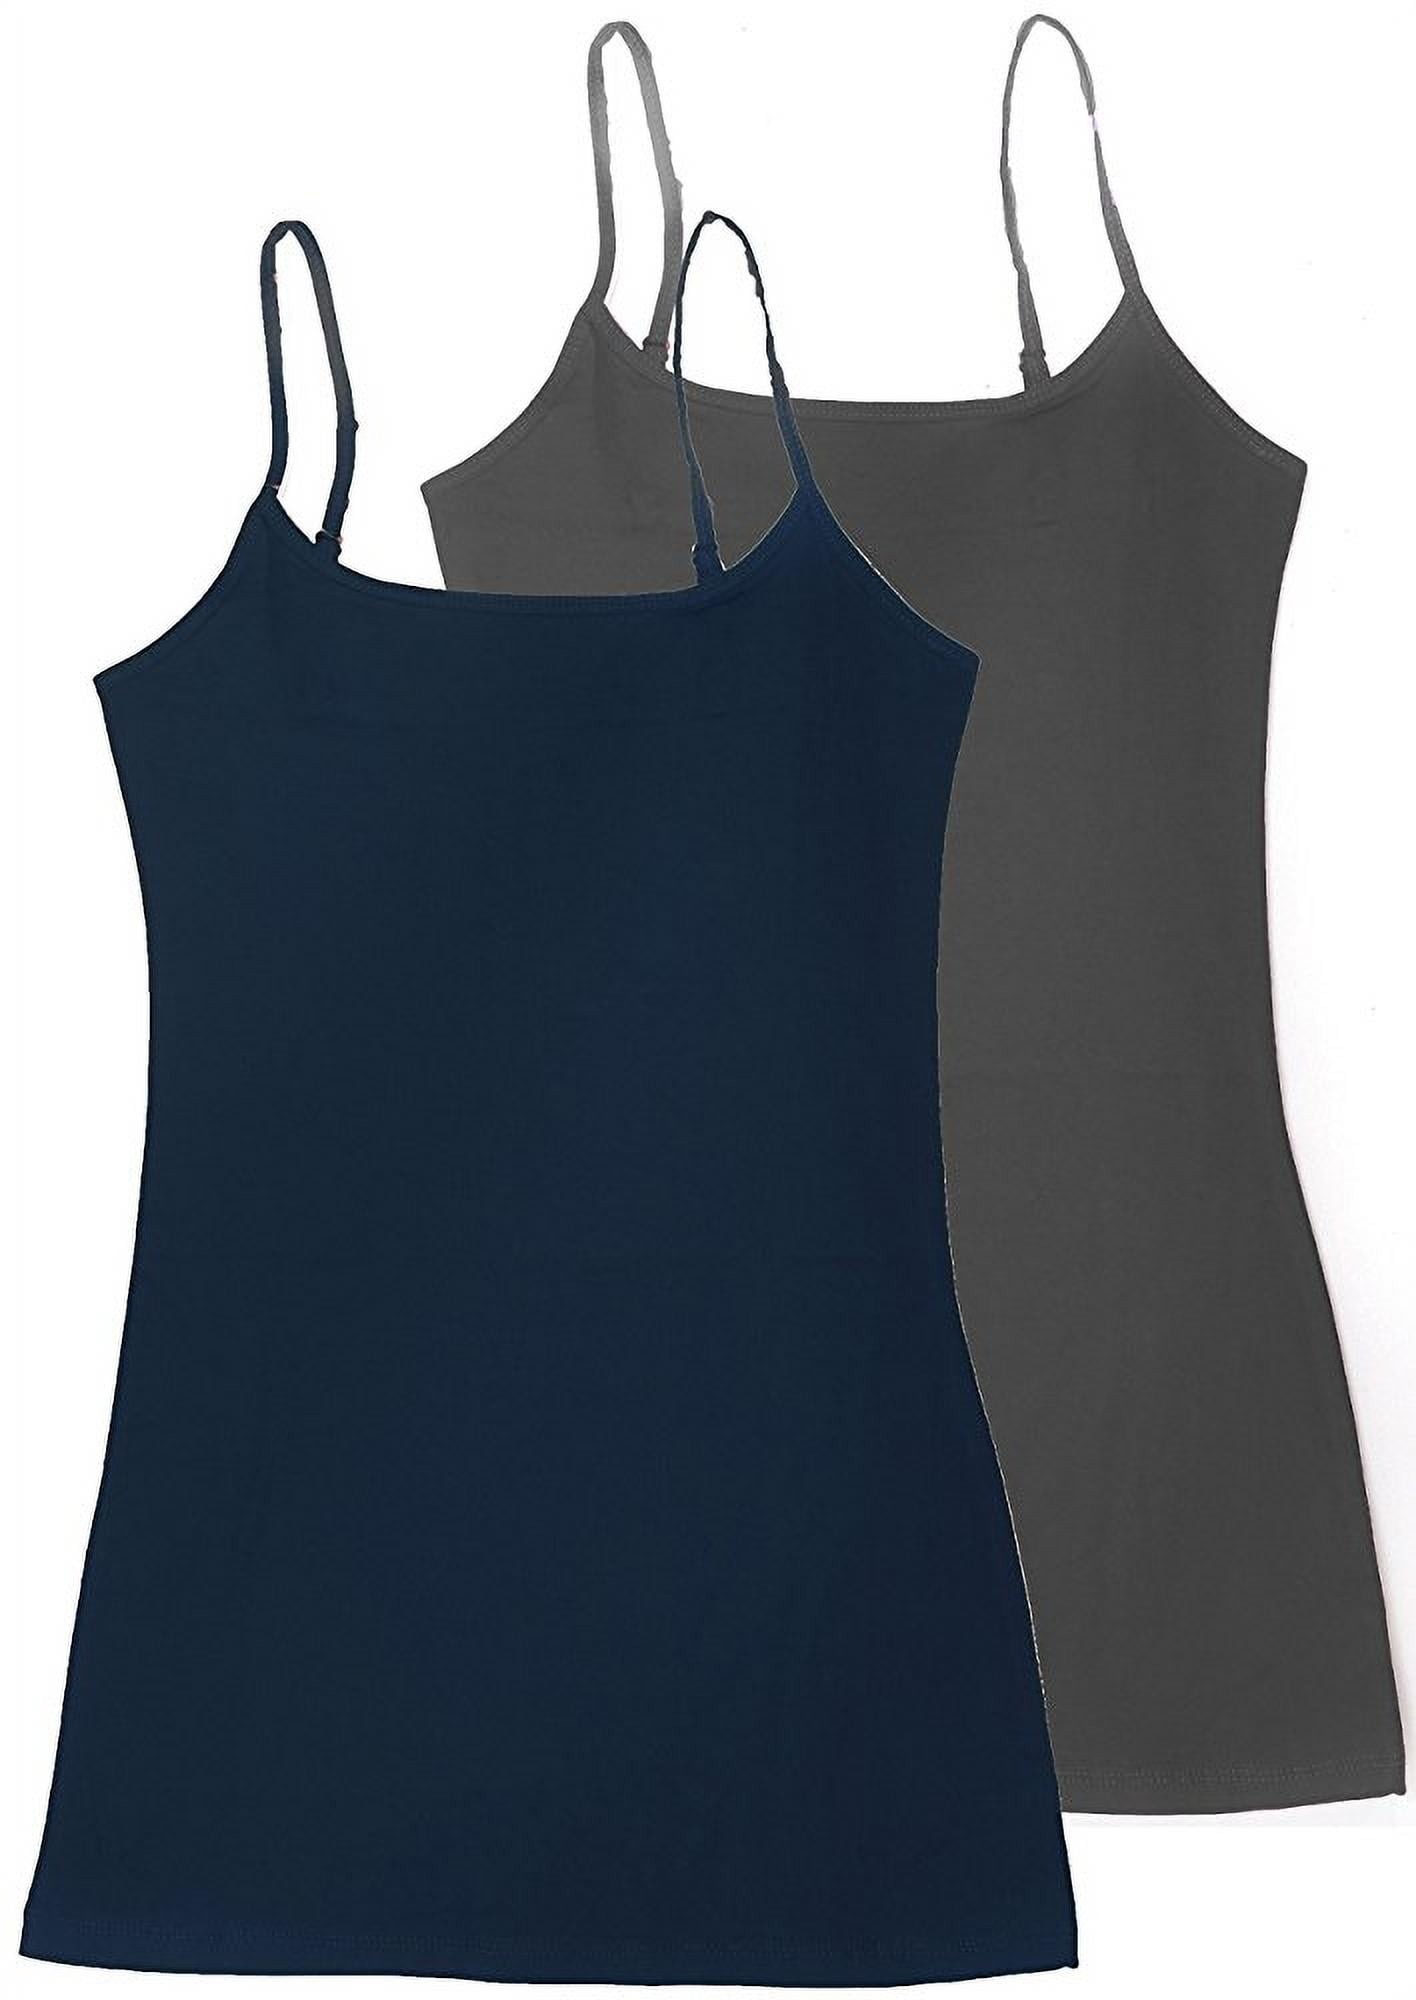 3 Packs - Womens & Plus Sizes Basic Solid Long Length Adjustable Spaghetti  Strap Tank Top Camisoles